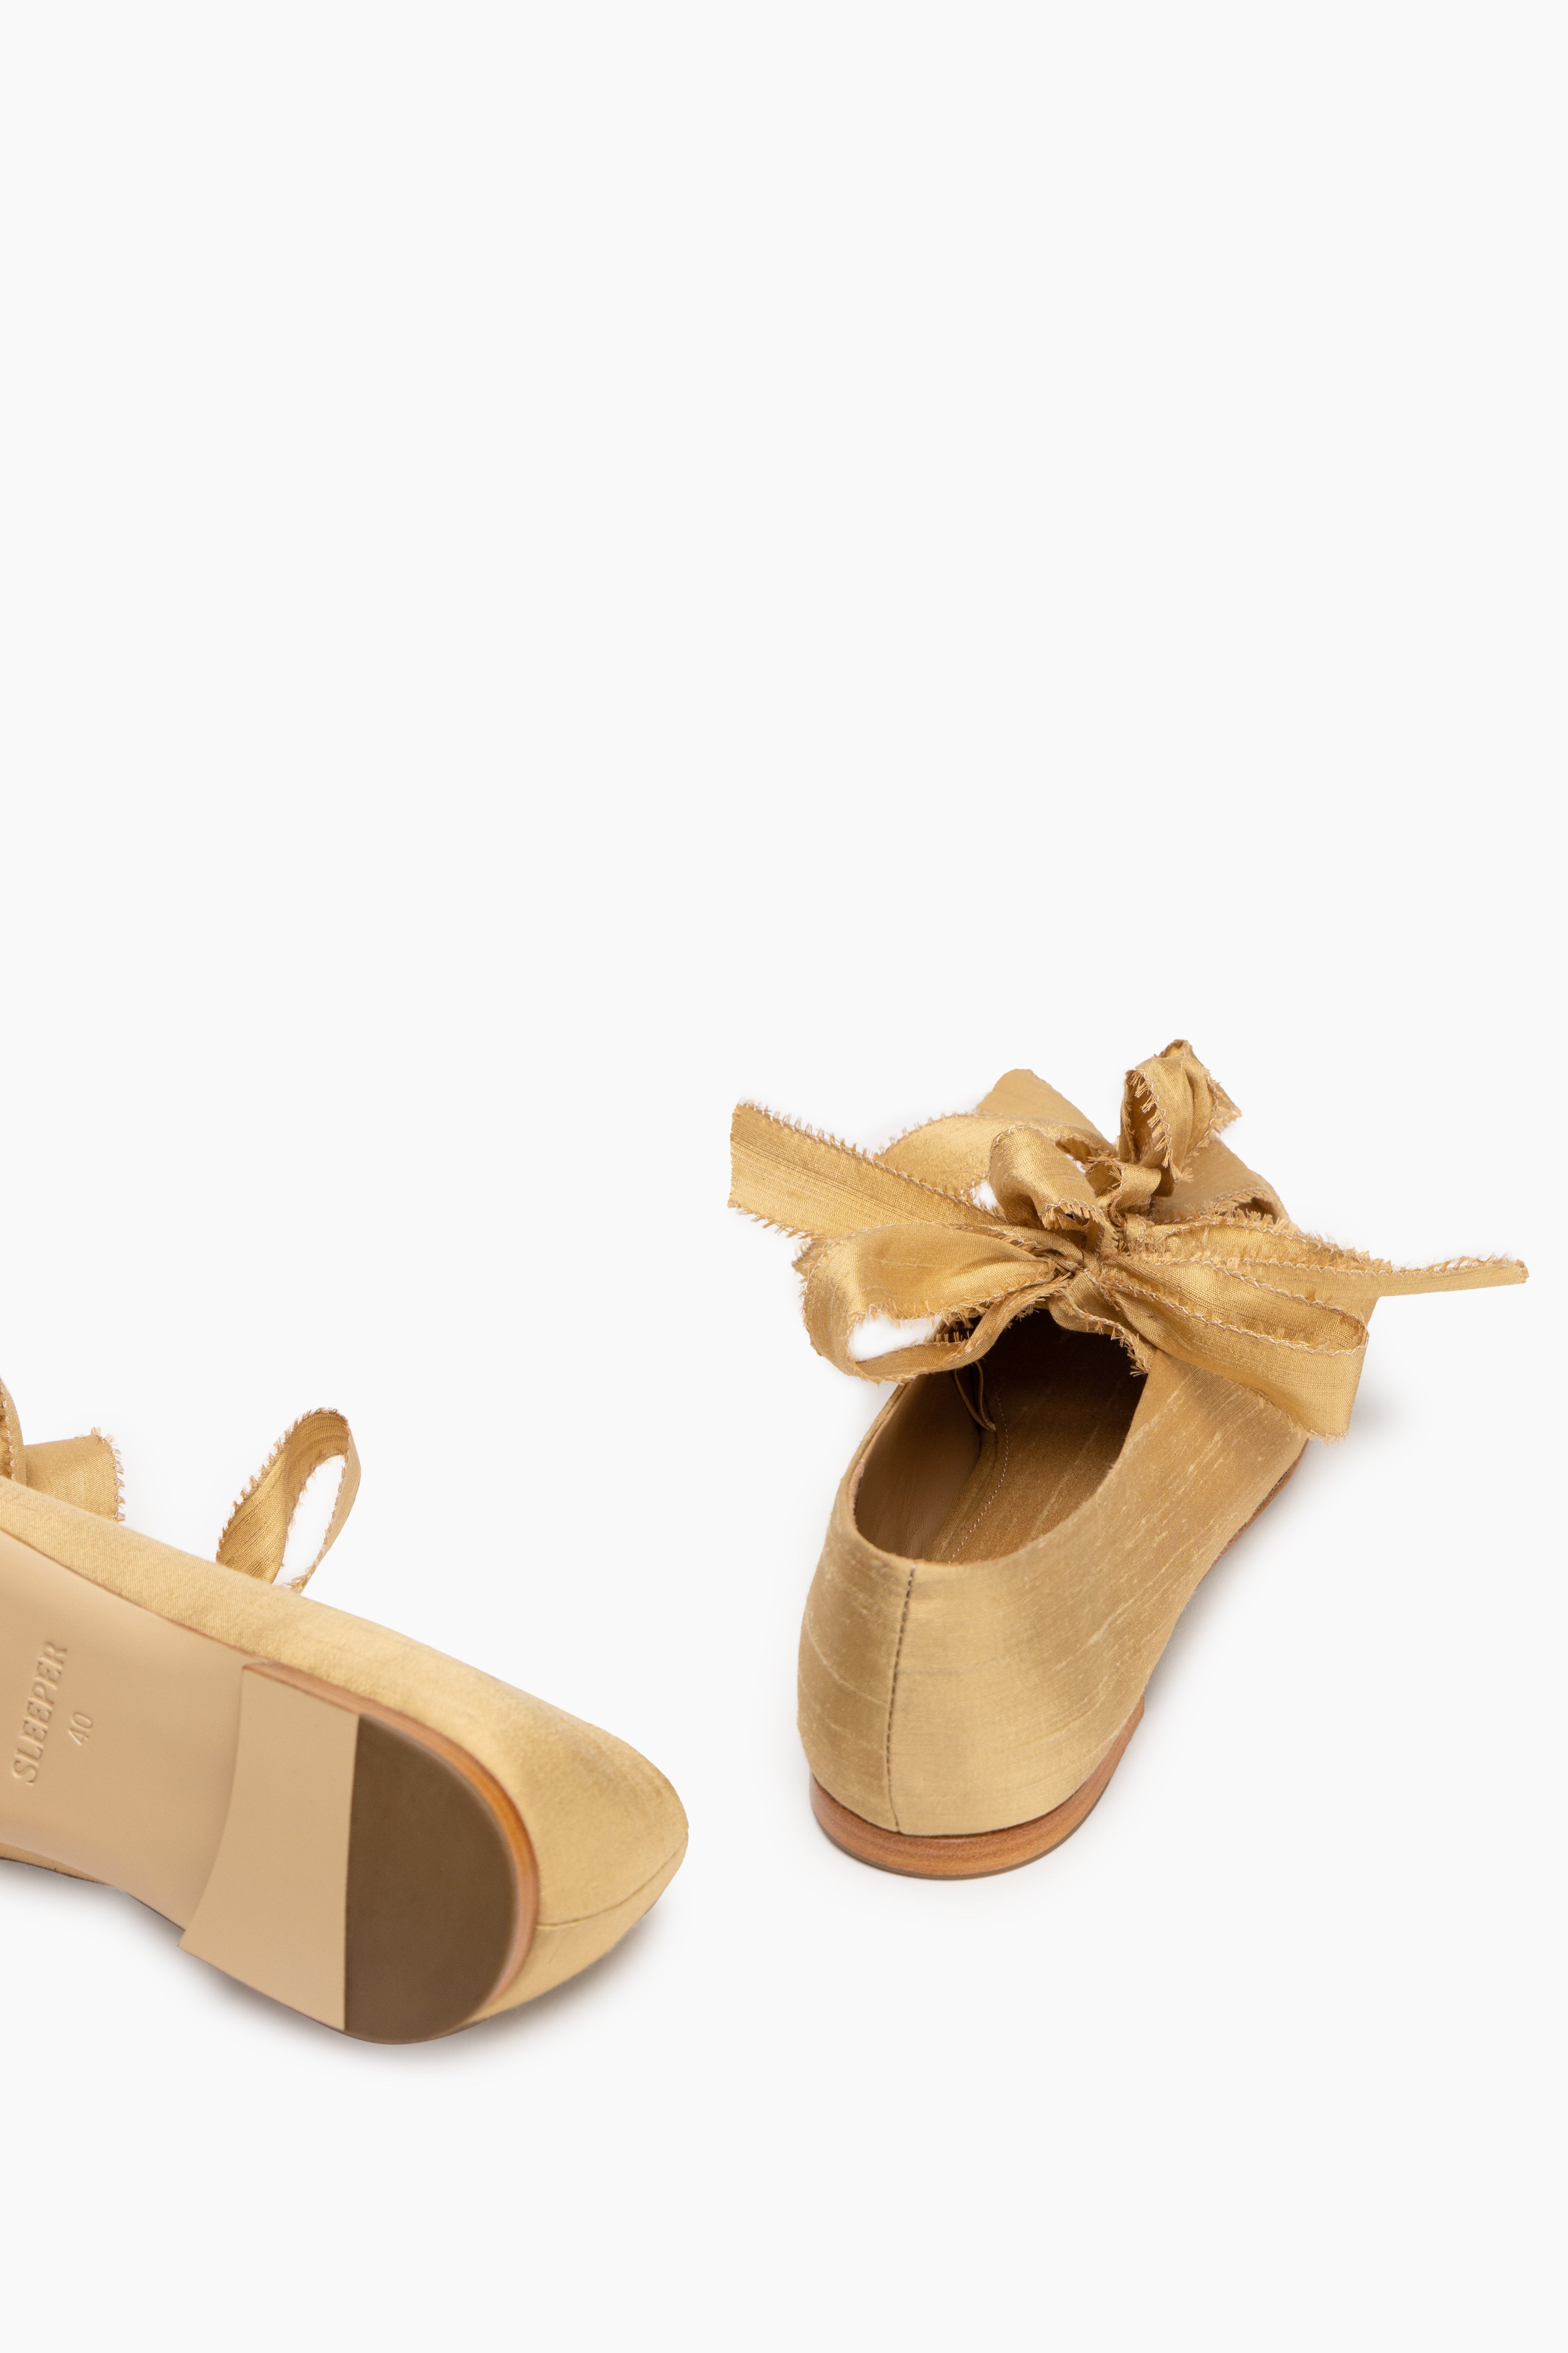 Mille-feuille Silk Flats with Bows